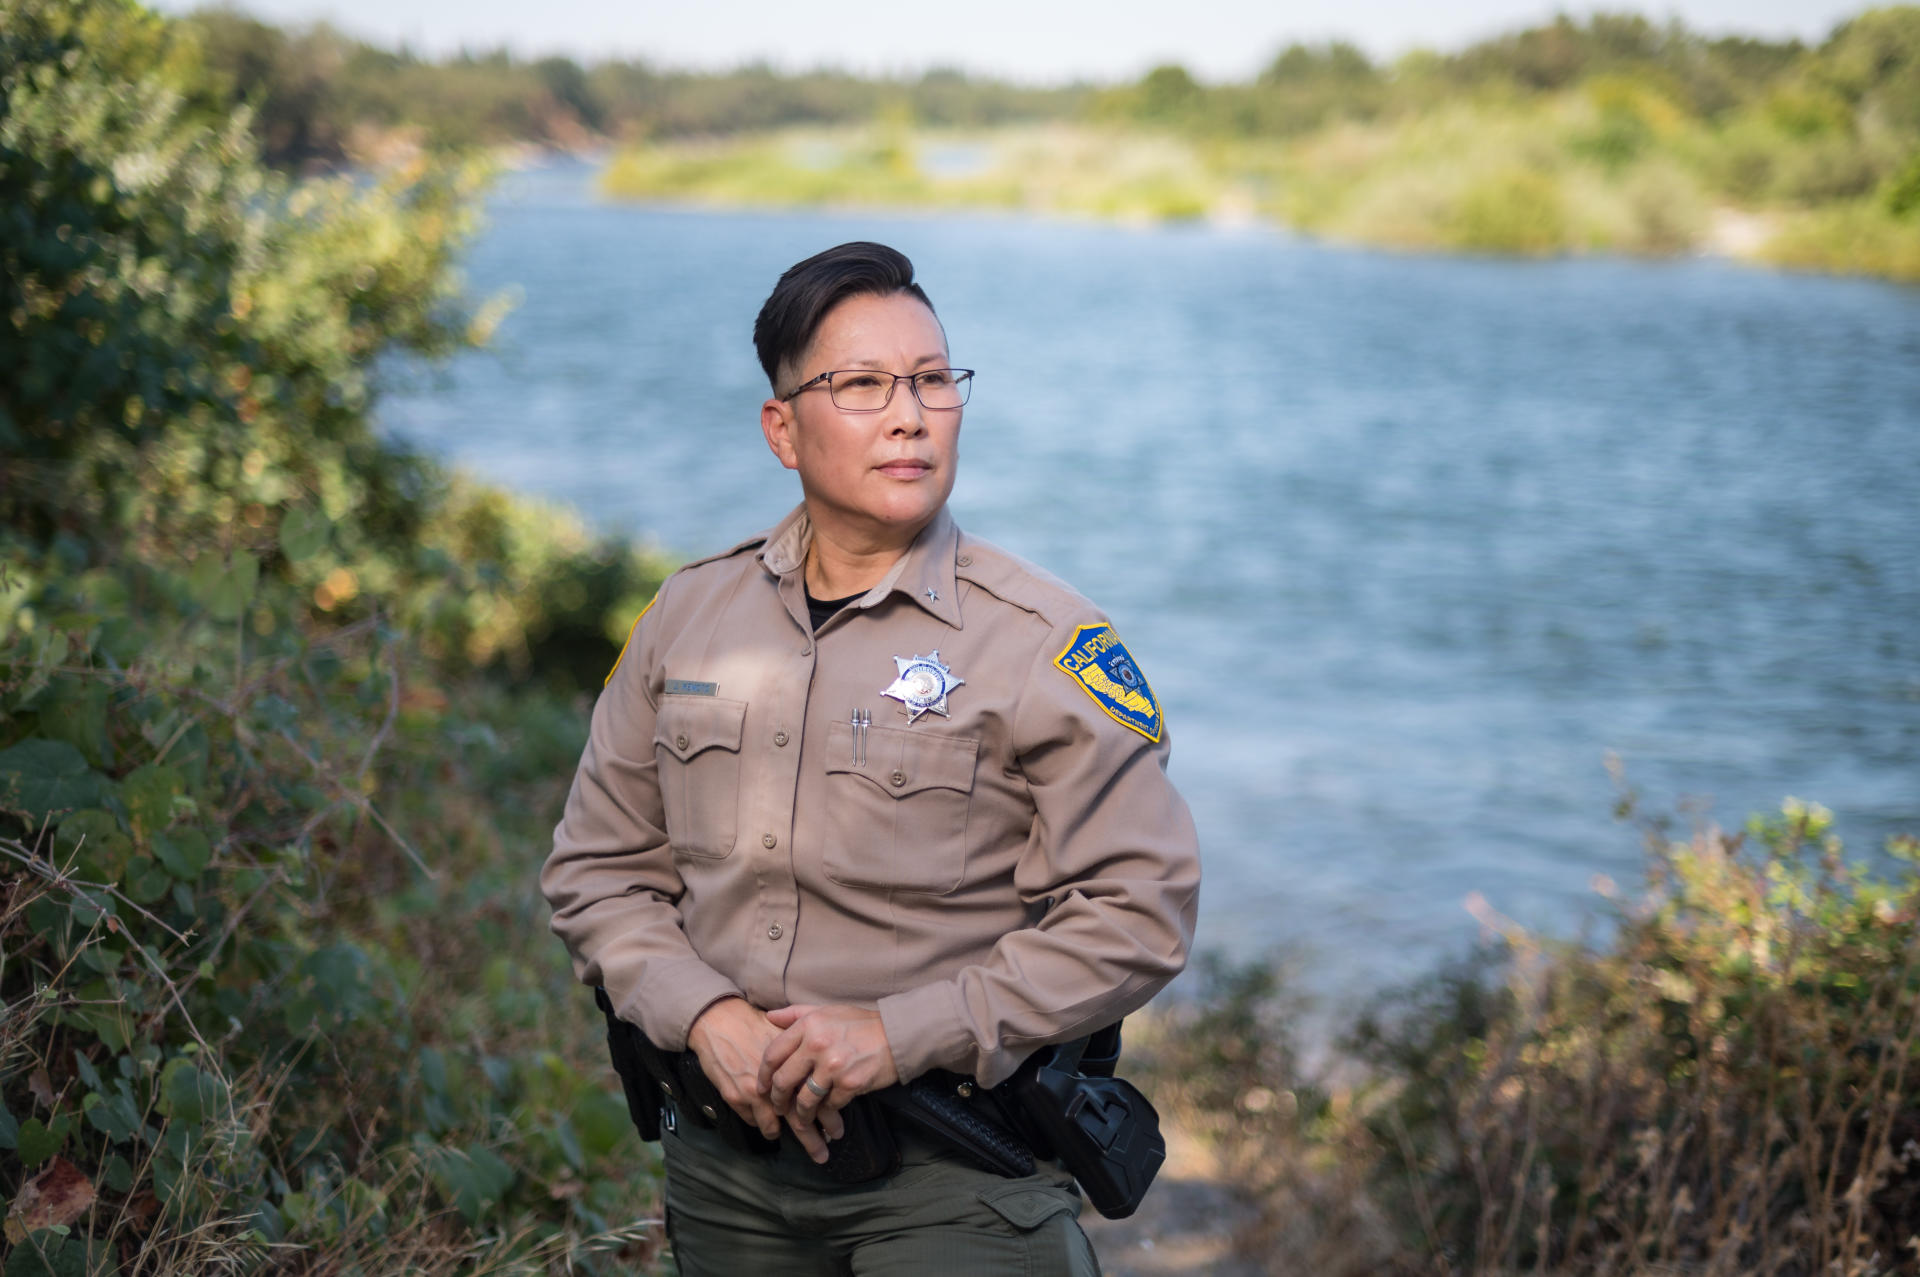 Jennifer Ikemoto, assistant chief of special operations for California Department, poses for a photo while wearing her uniform and stands along the American River near the DFW Regional Office in Rancho Cordova, Calif.